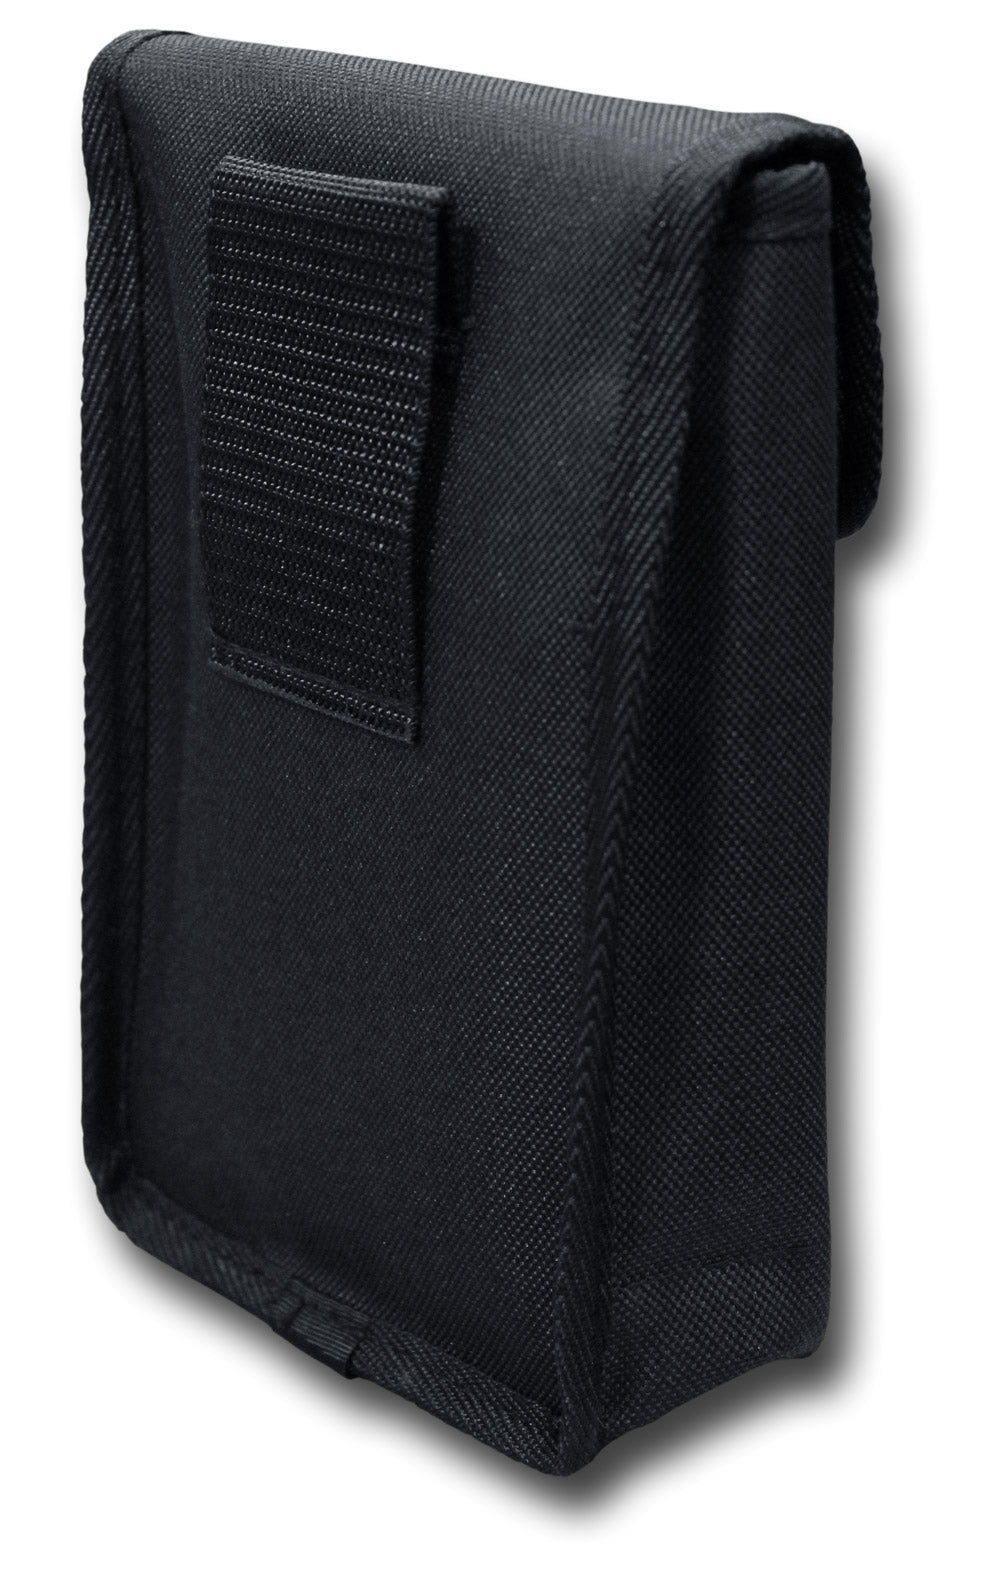 POLICE NYLON DOCUMENT POUCH - BACK